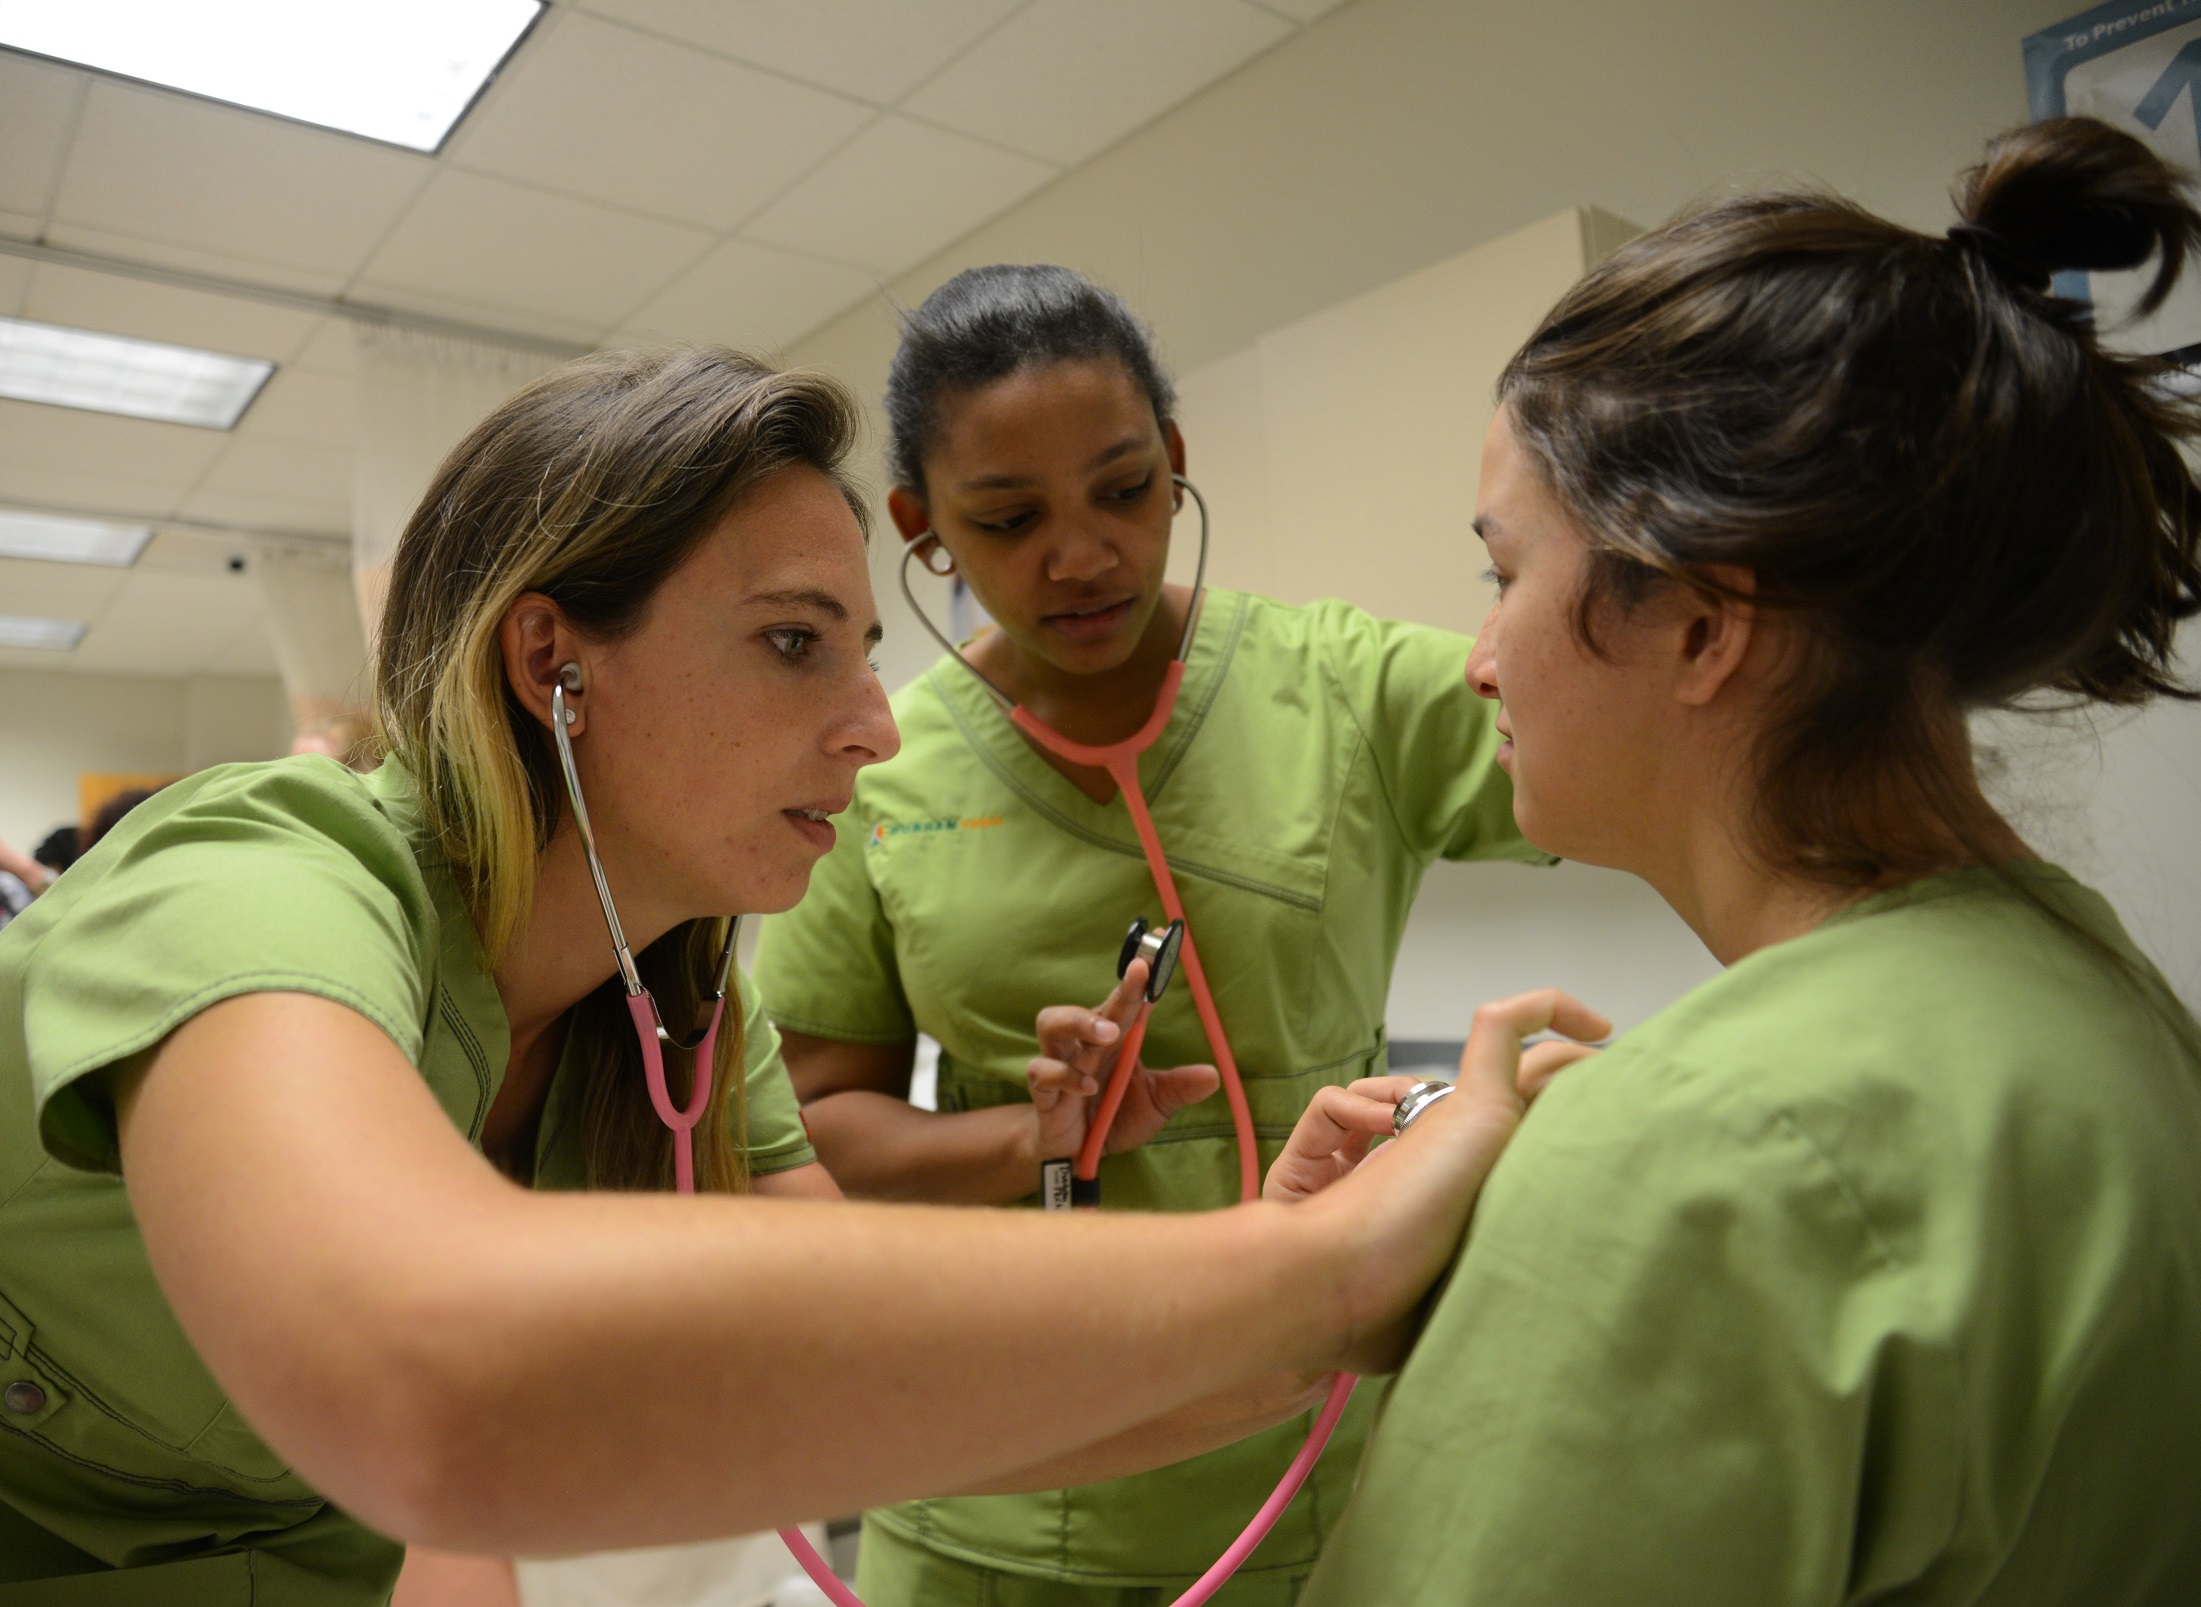 three students, one is pressing stethescope against the others chest while they sit, third student is looking on